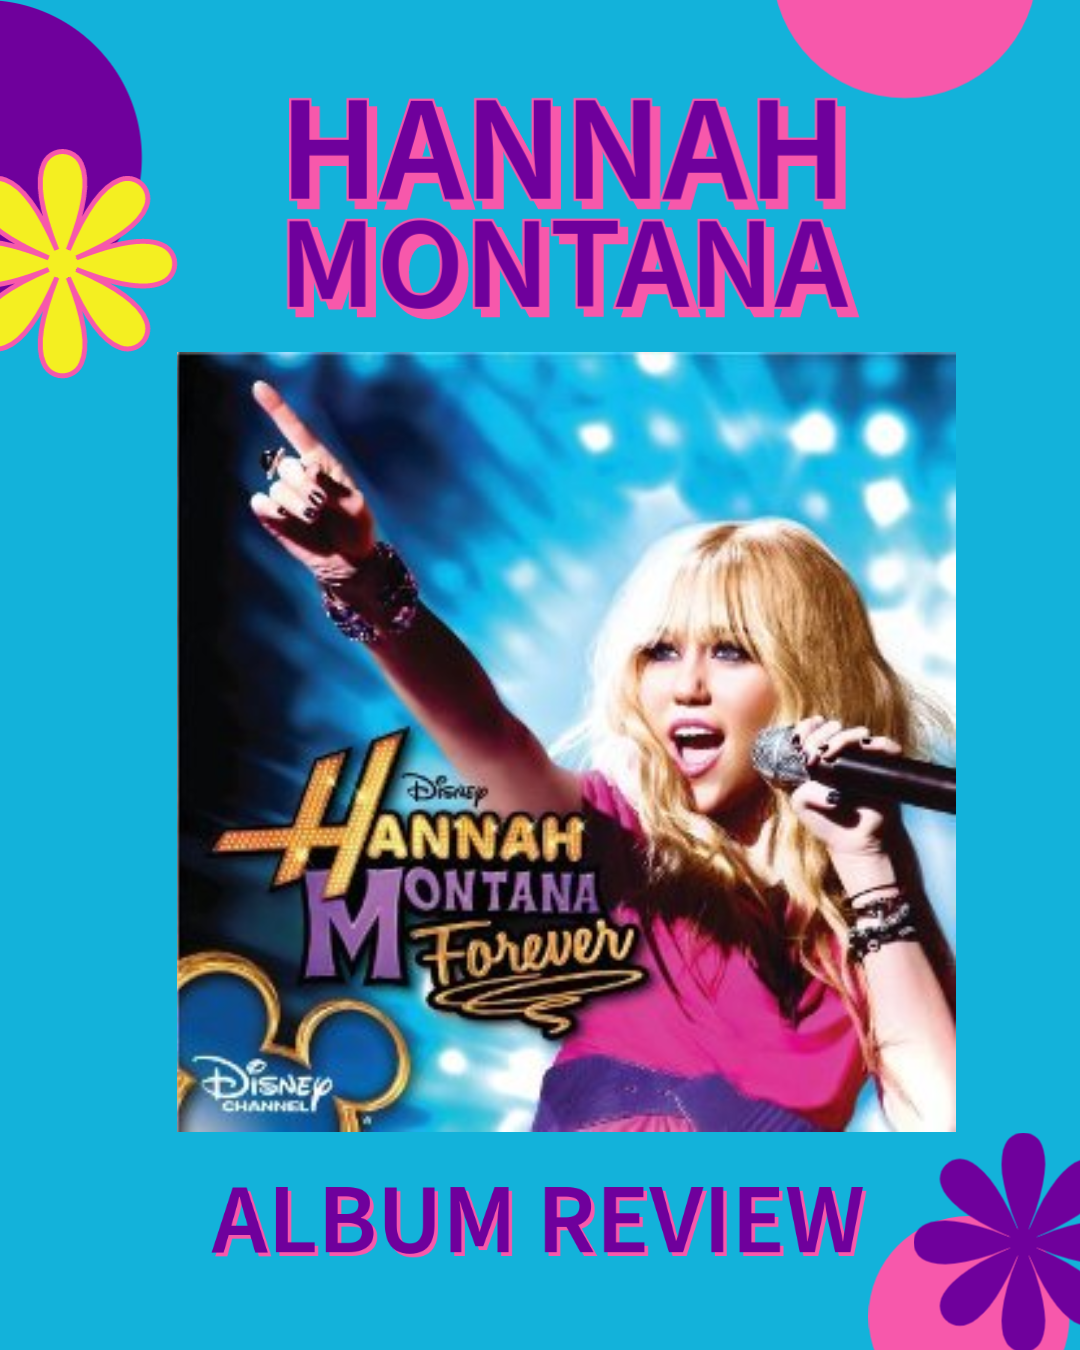 Hannah Montana Forever album review – THE PROWL